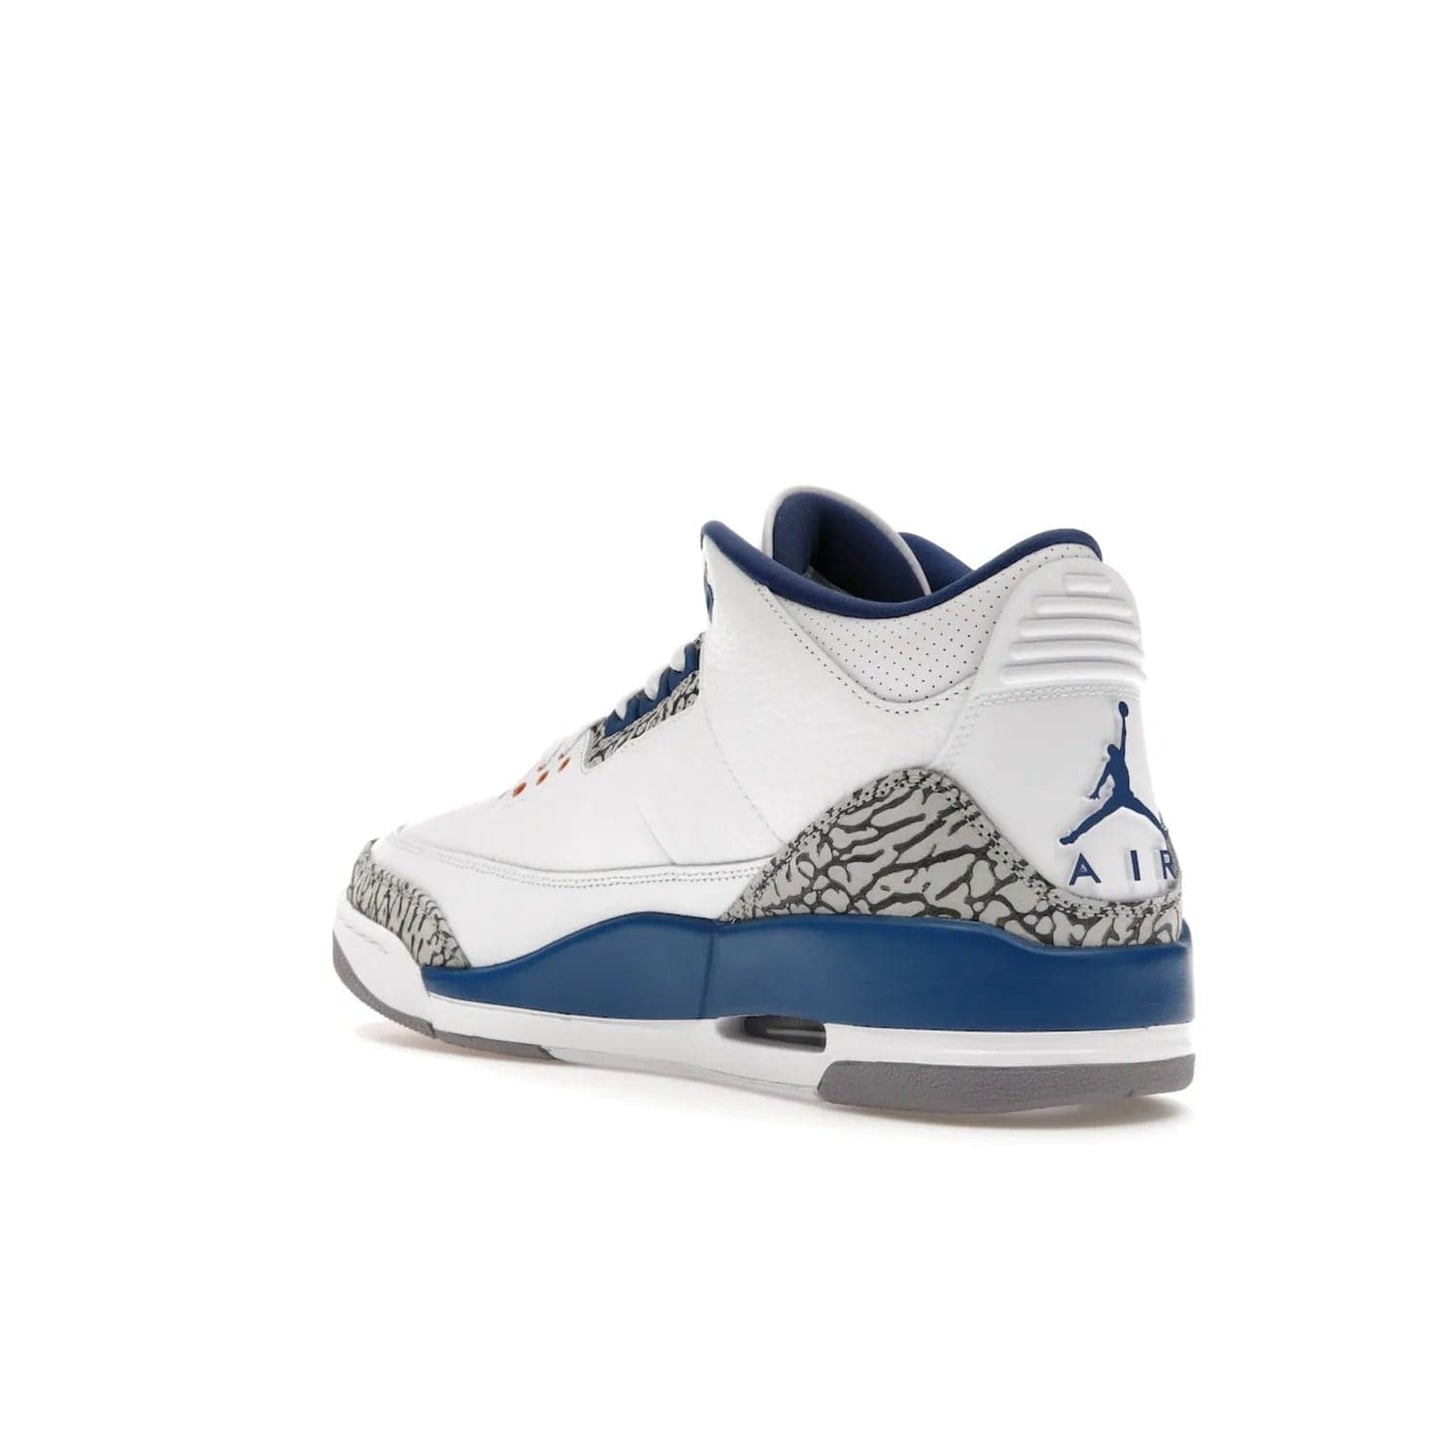 Jordan 3 Retro Wizards - Image 24 - Only at www.BallersClubKickz.com - ##
Special tribute sneaker from Jordan Brand to Michael Jordan's time with the Washington Wizards. Iconic white upper, orange Jumpman logo, blue accents, metallic copper details, and cement grey outsole. Buy the Air Jordan 3 Retro Wizards April 29, 2023.